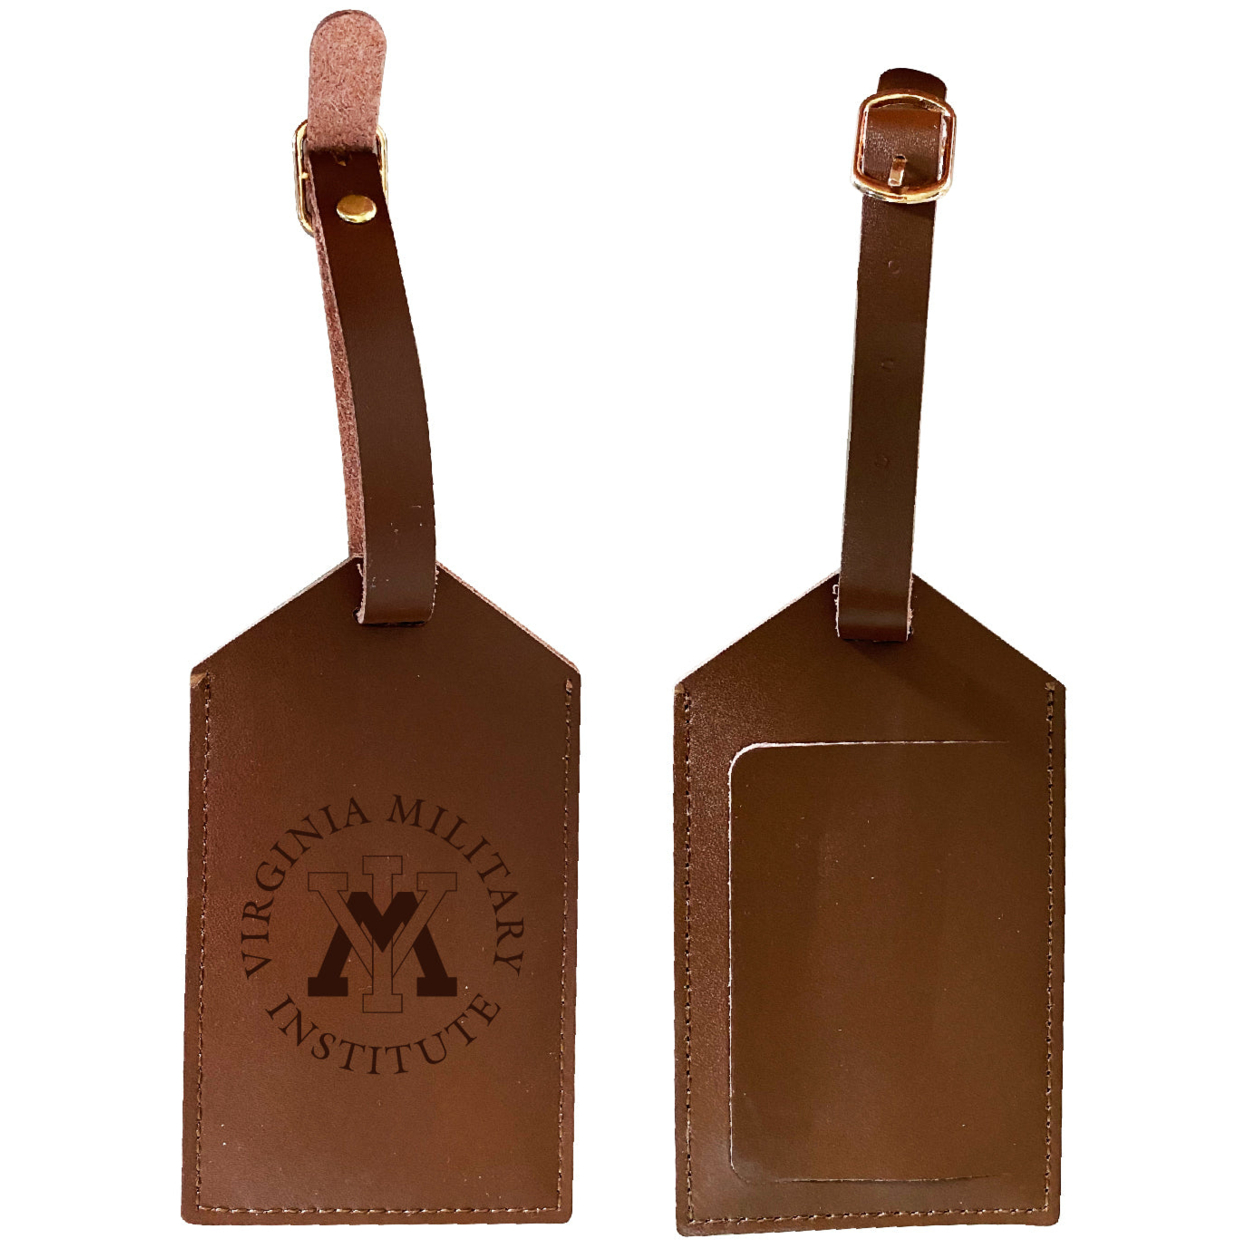 VMI Keydets Leather Luggage Tag Engraved